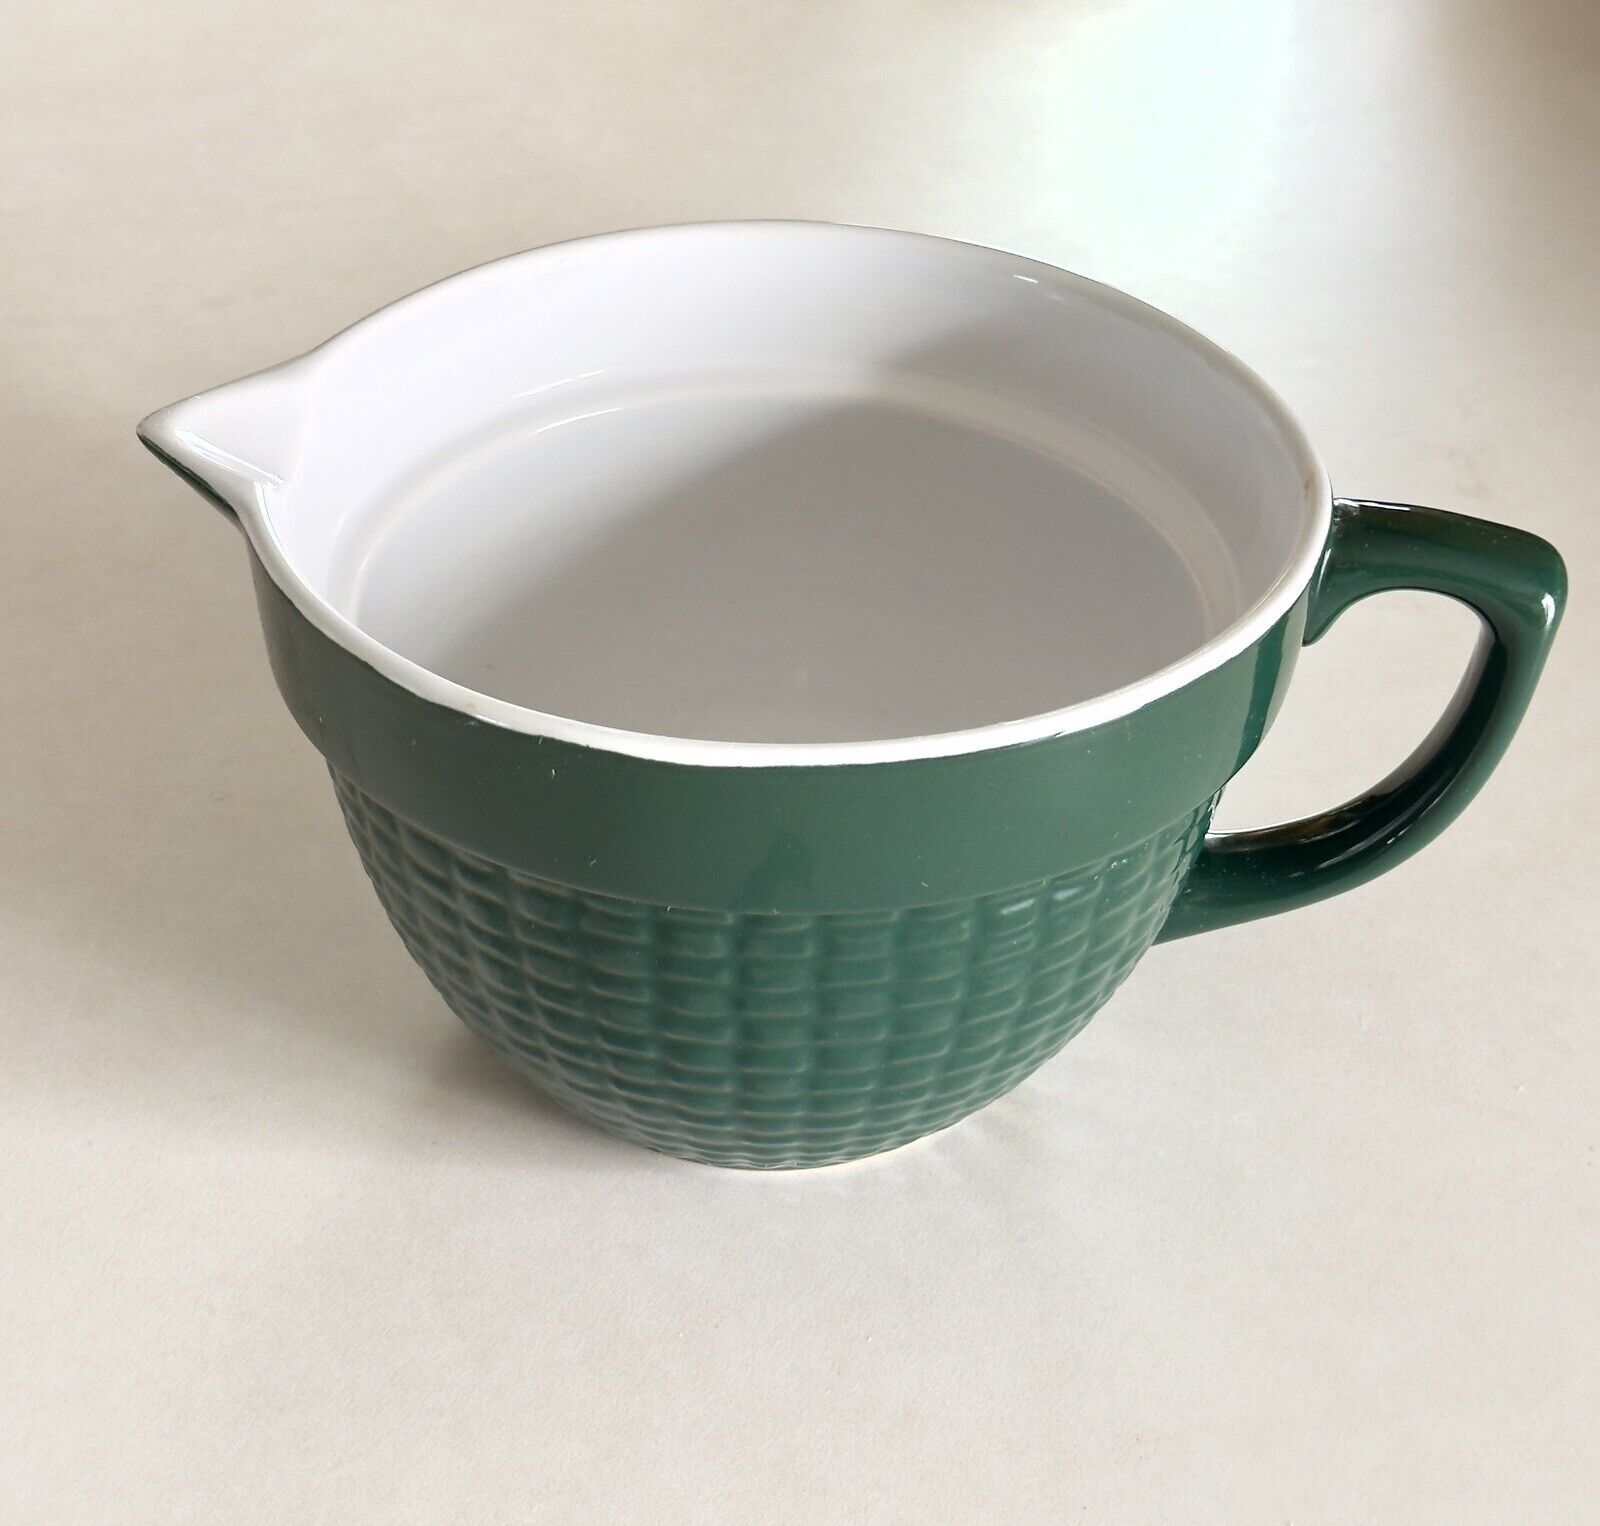 Kate Williams Stonewall Kitchen Spouted Mixing Bowl Green Gingham 2 Quarts